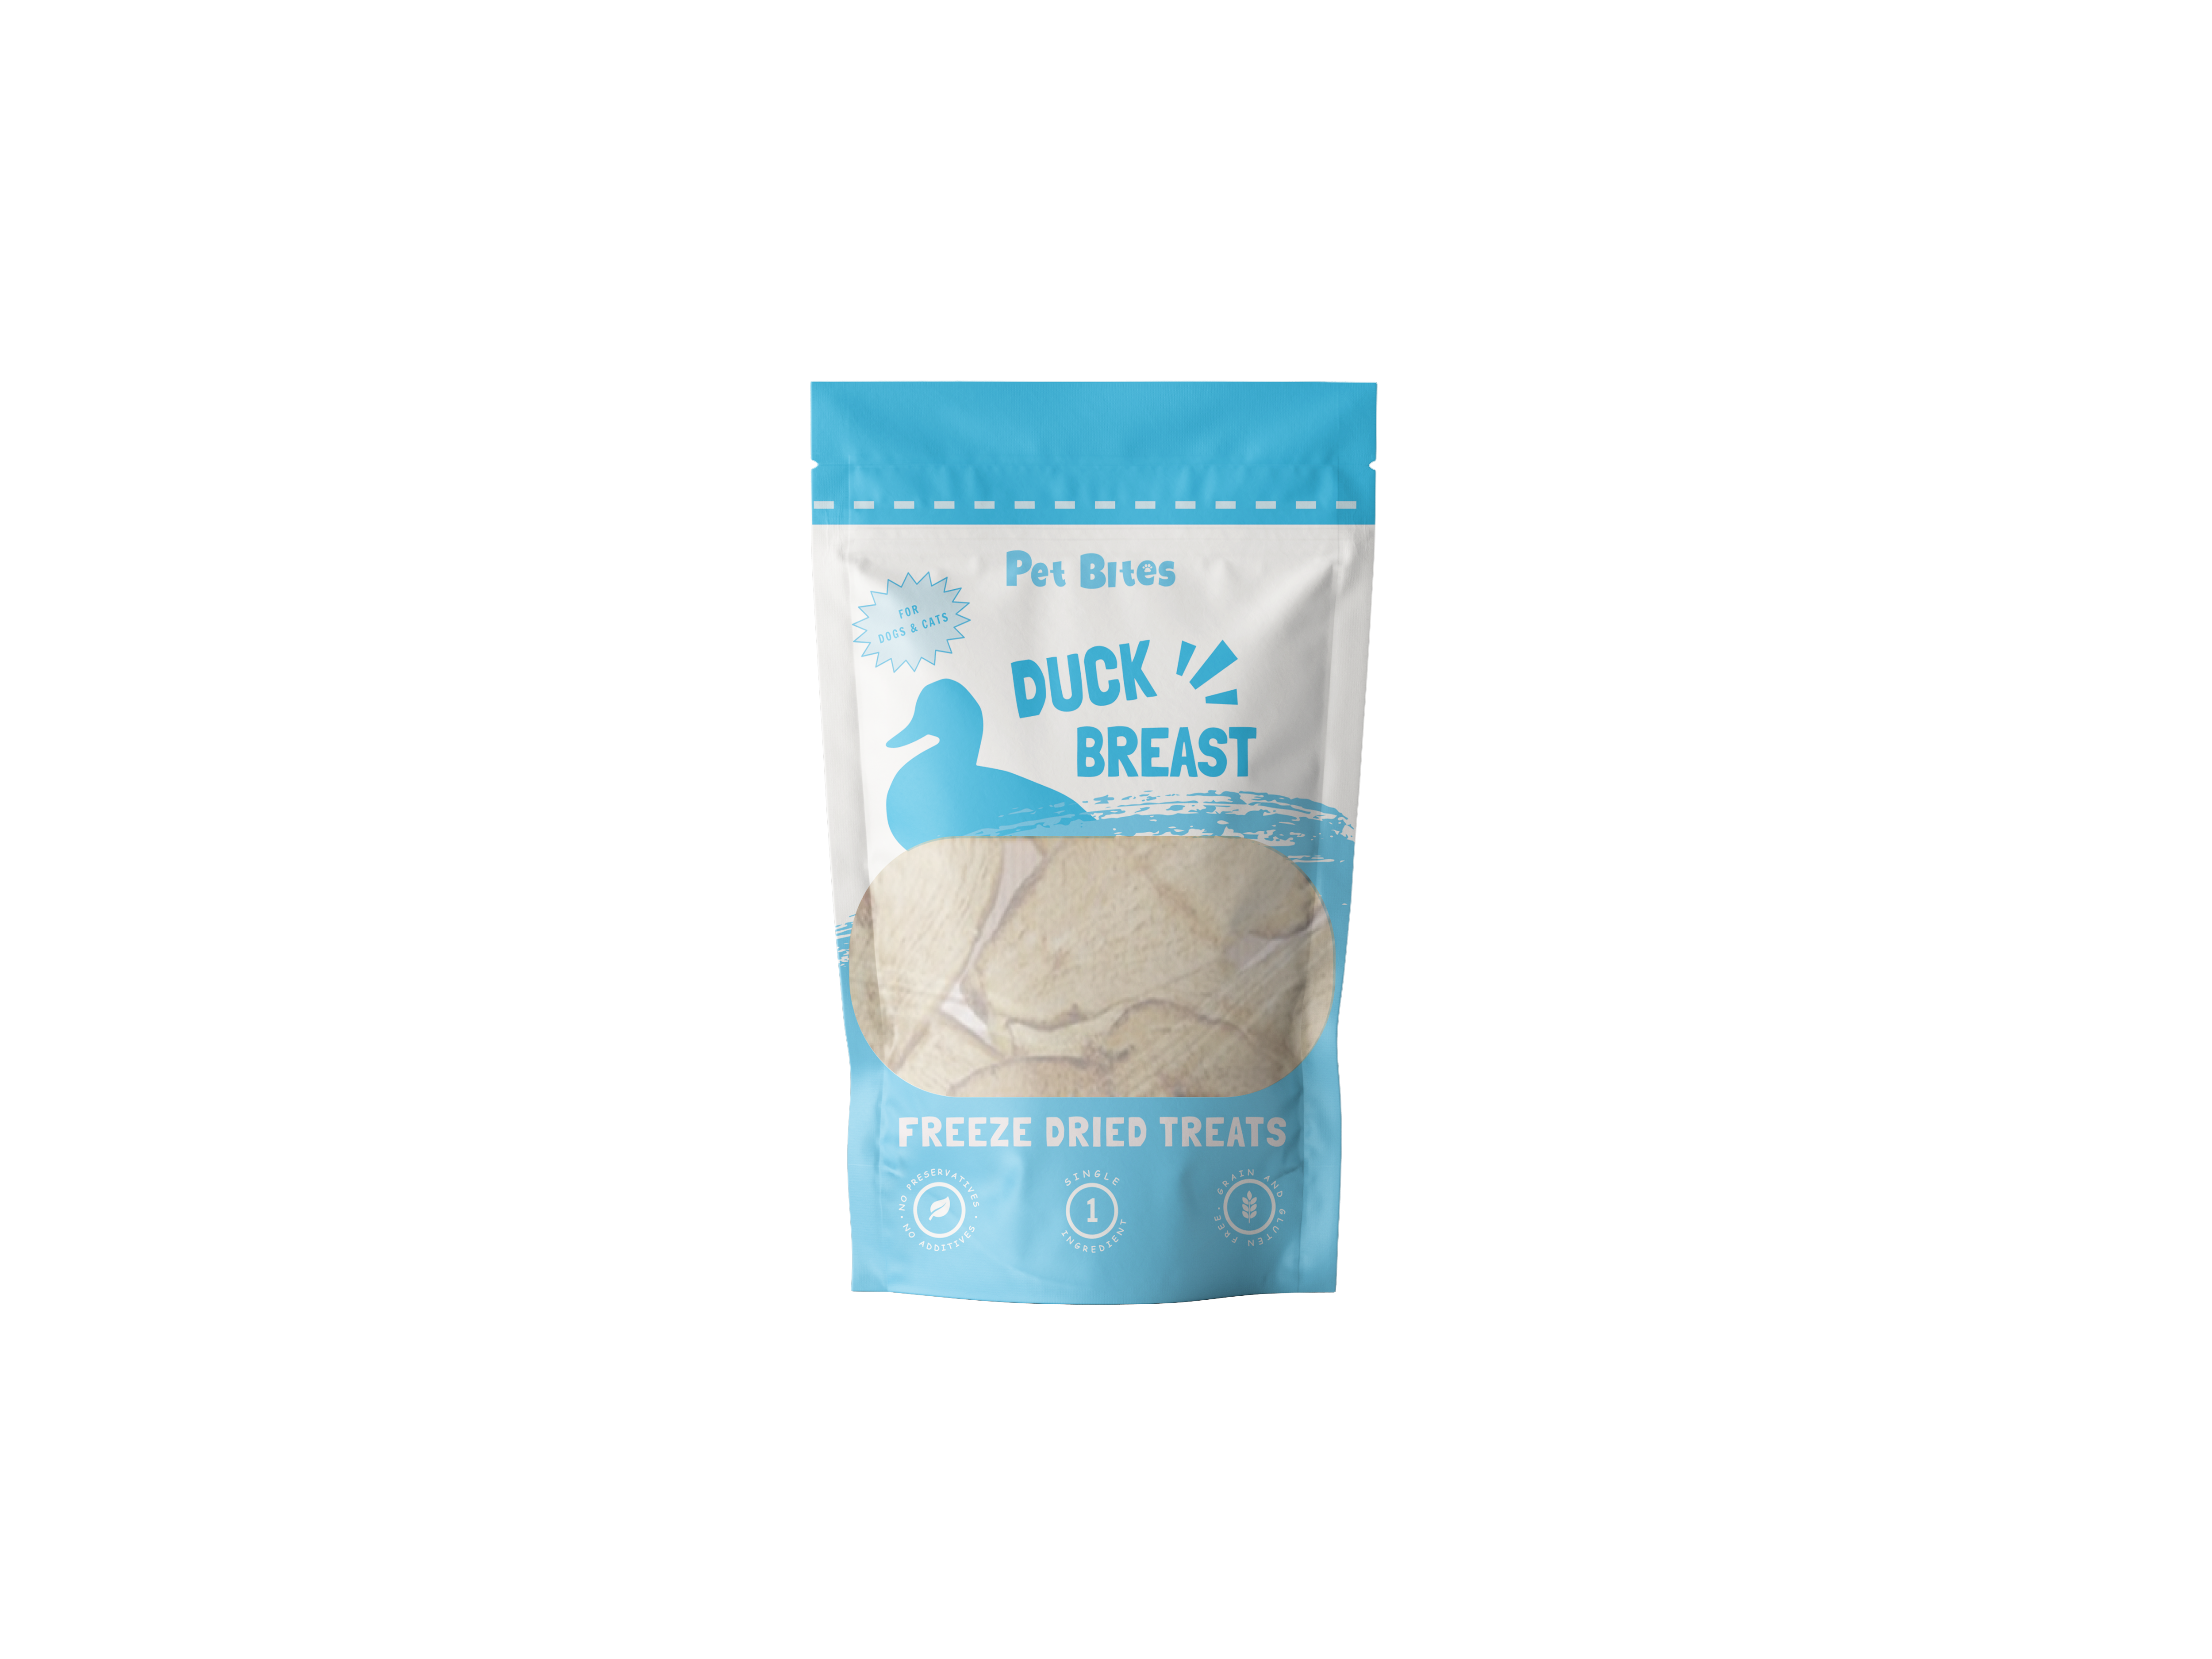 Pet Bites Freeze Dried Treats for Dogs and Cats